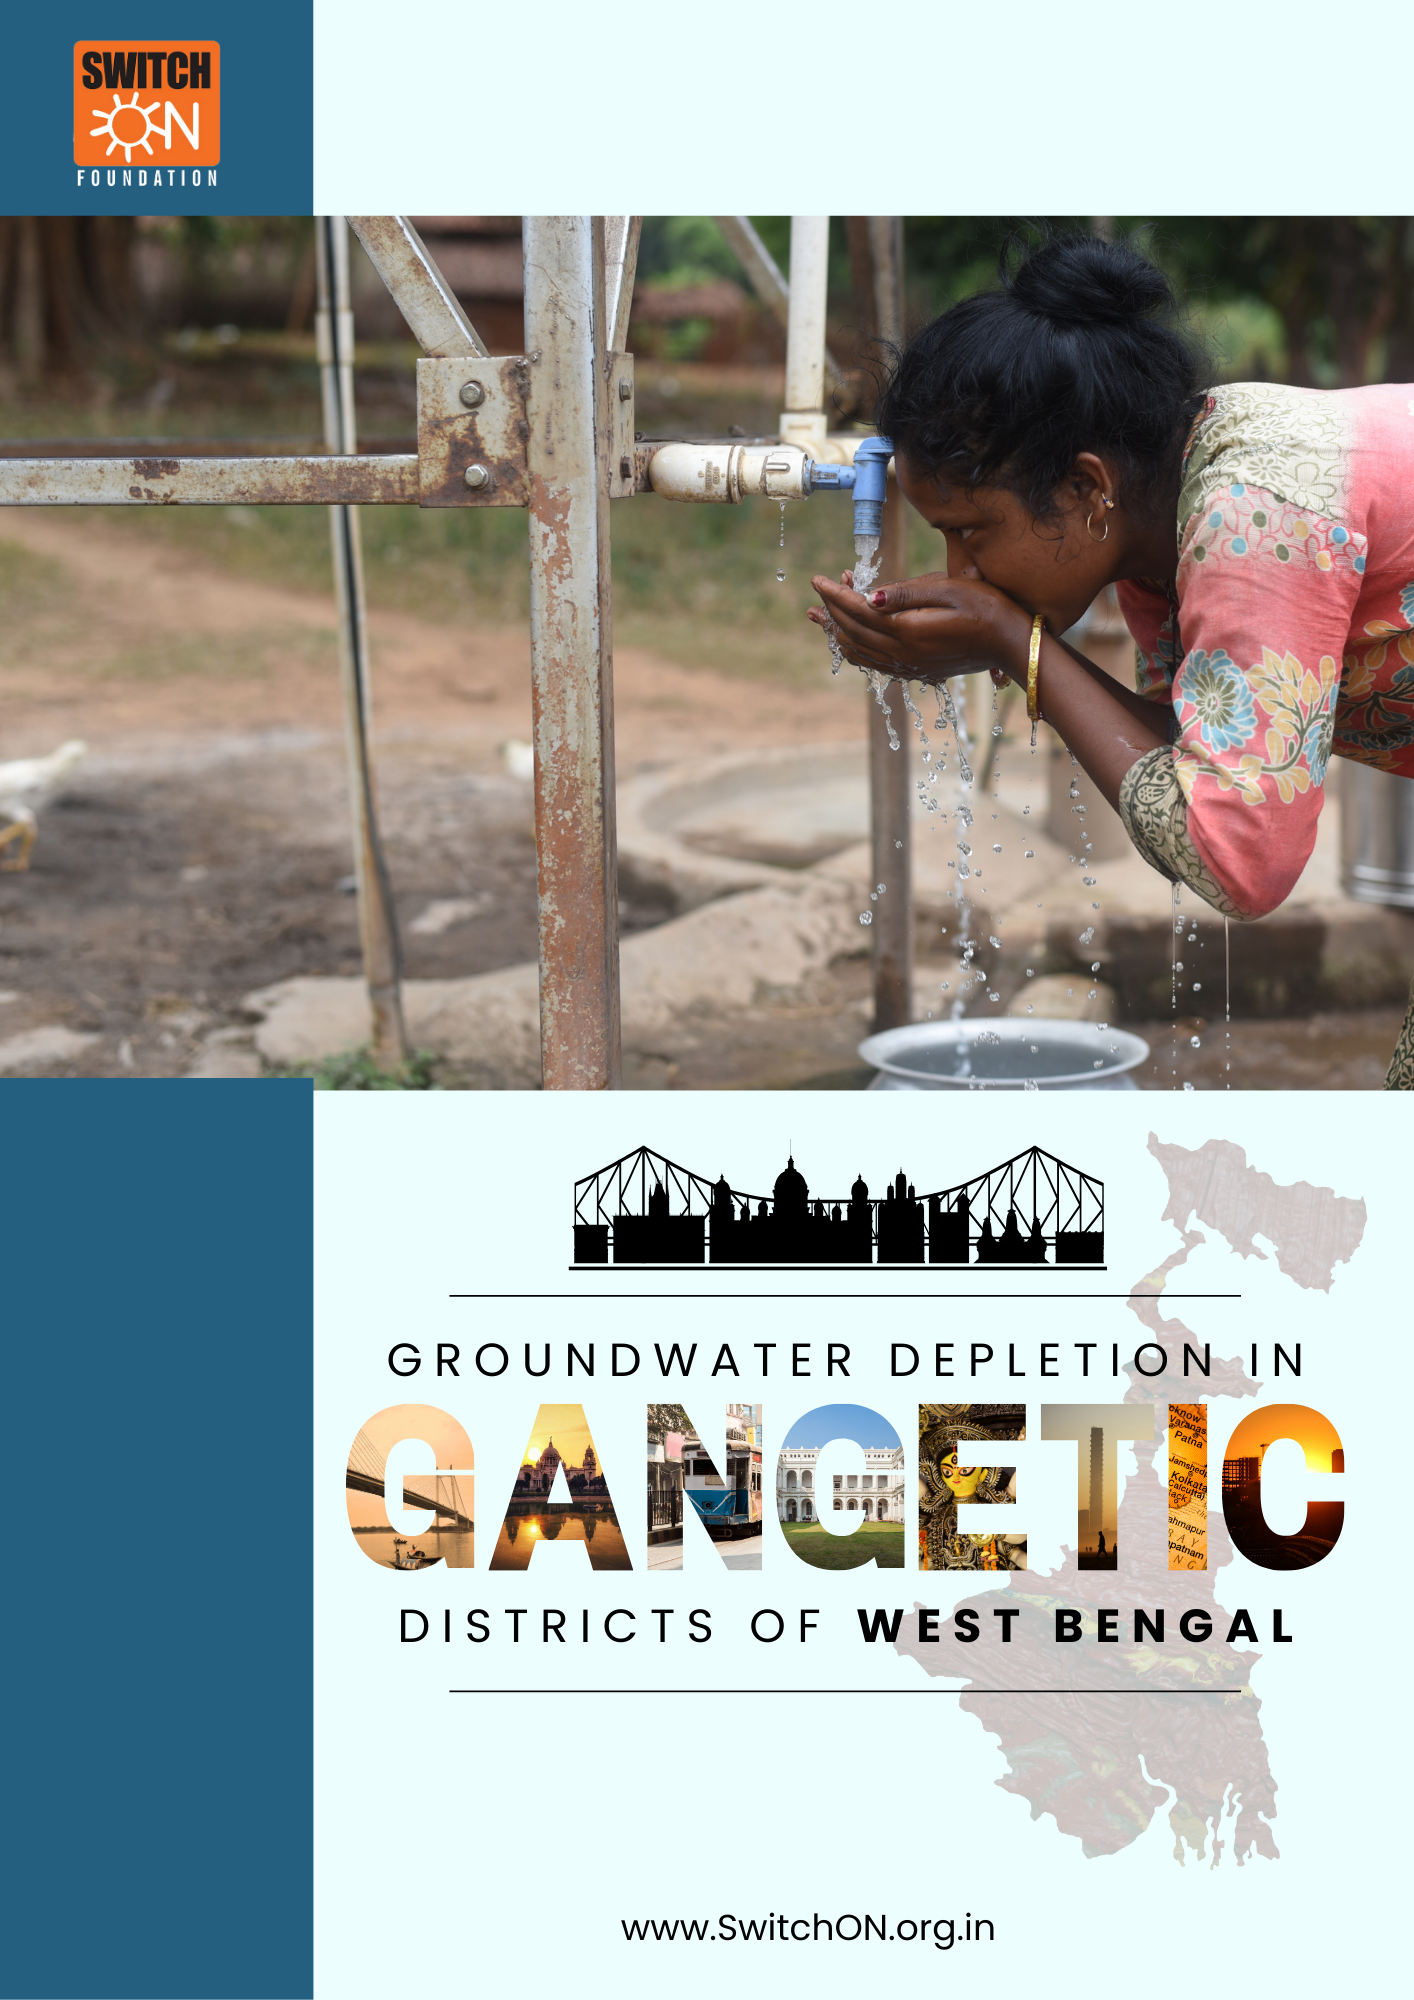 Groundwater depletion in Gangetic districts of West Bengal